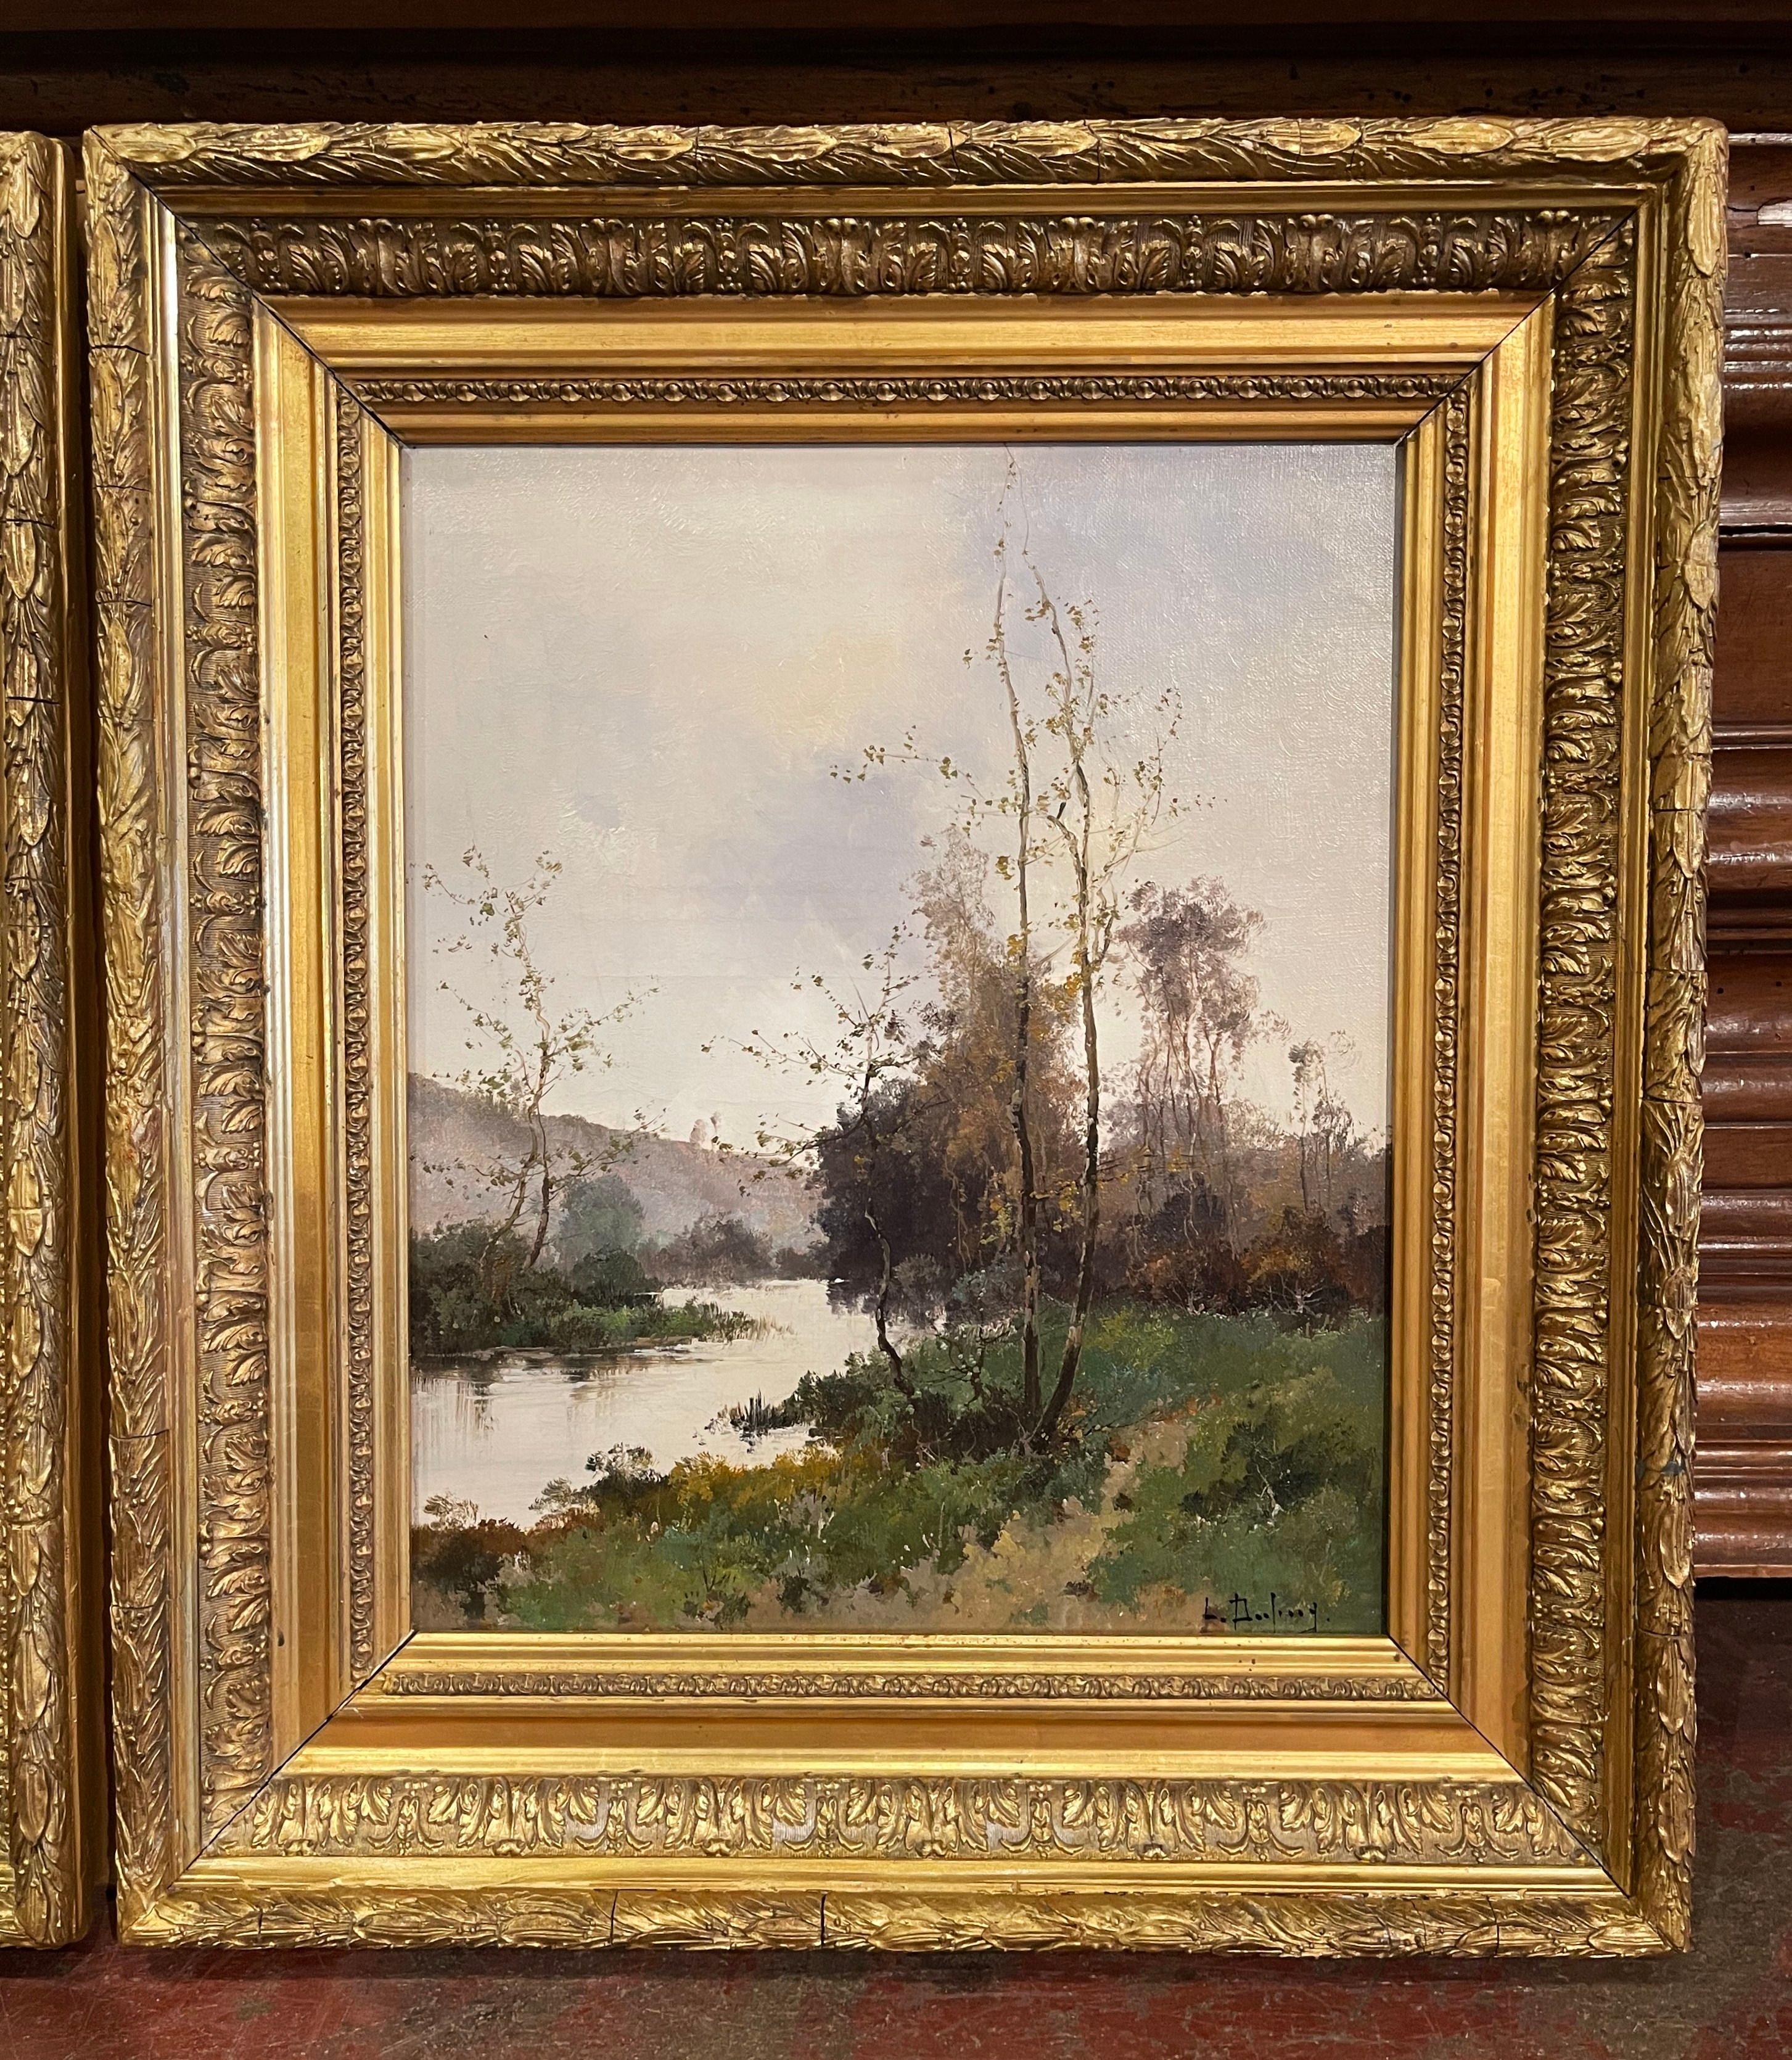 Carved Pair of Framed Oil on Canvas Paintings Signed Leon Dupuy for E. Galien-Laloue